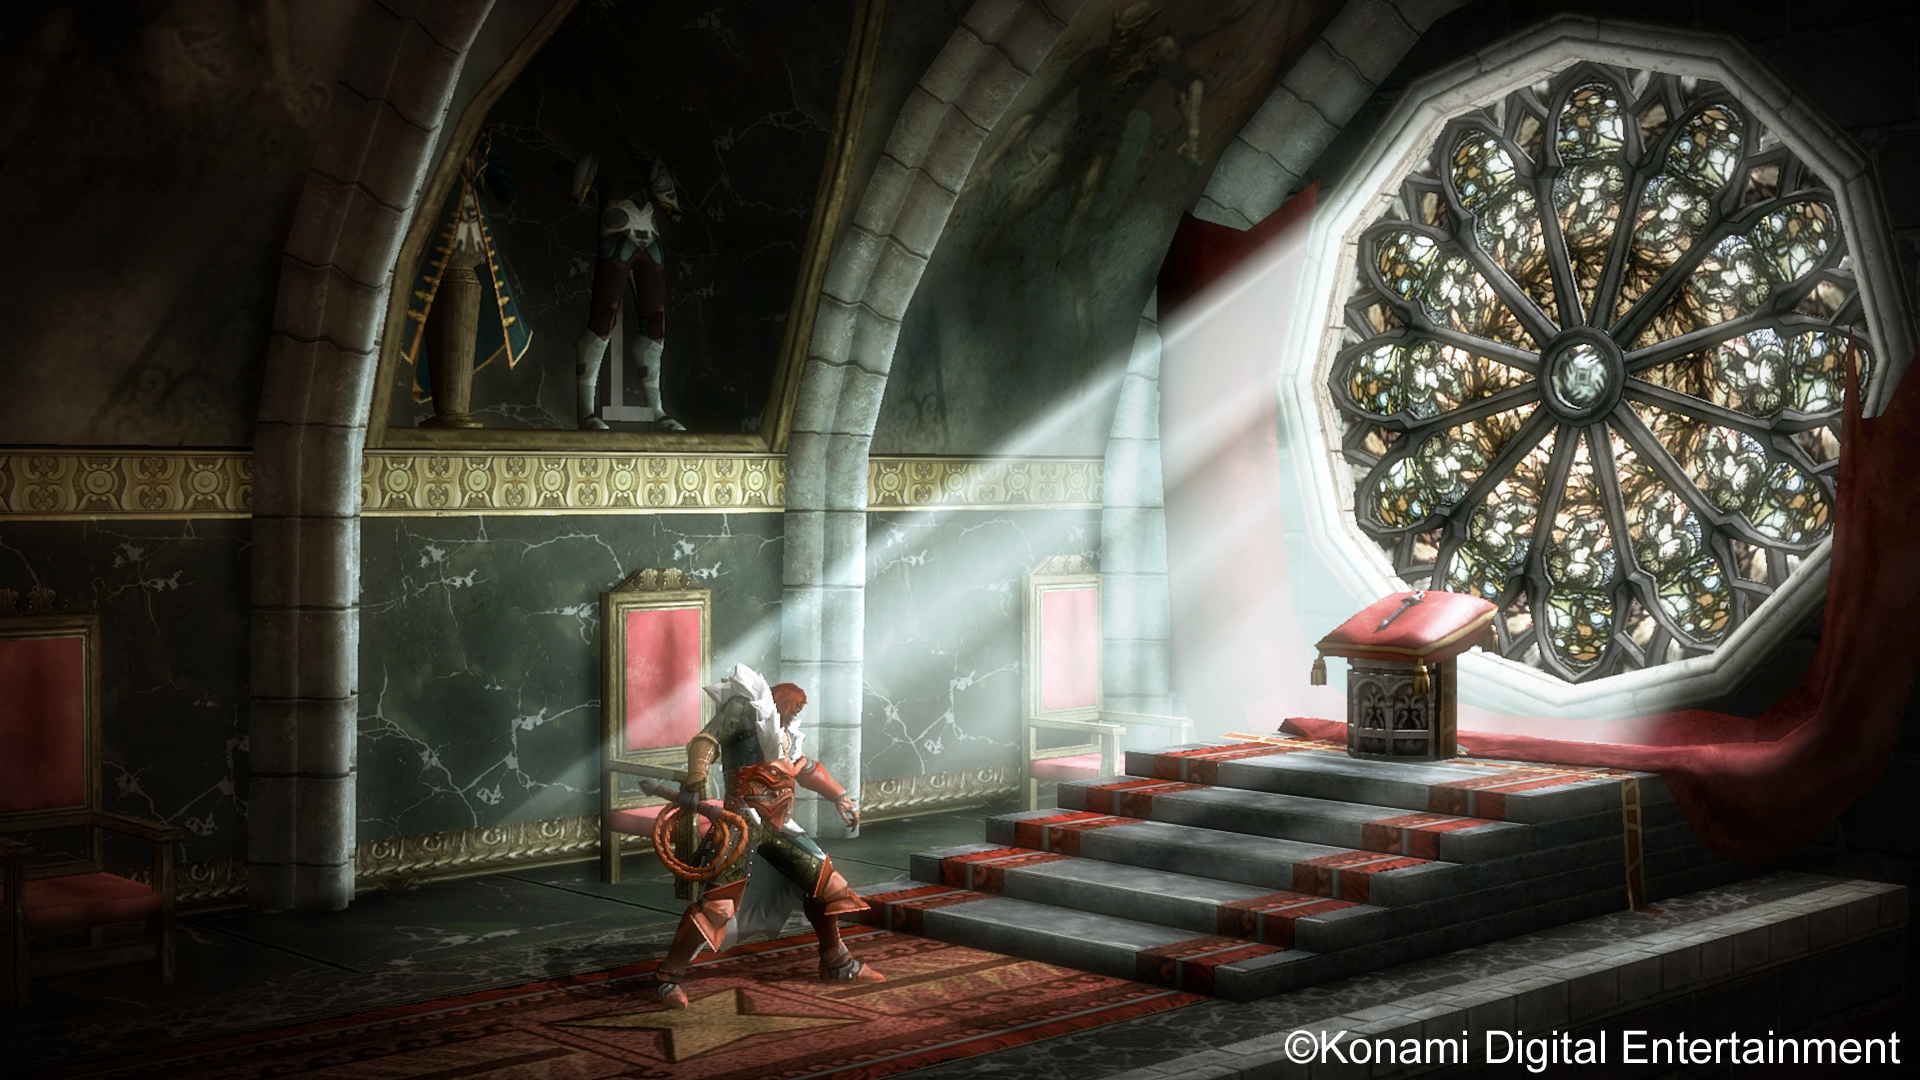 Castlevania: Lords of Shadow - Mirror of Fate Review (3DS)